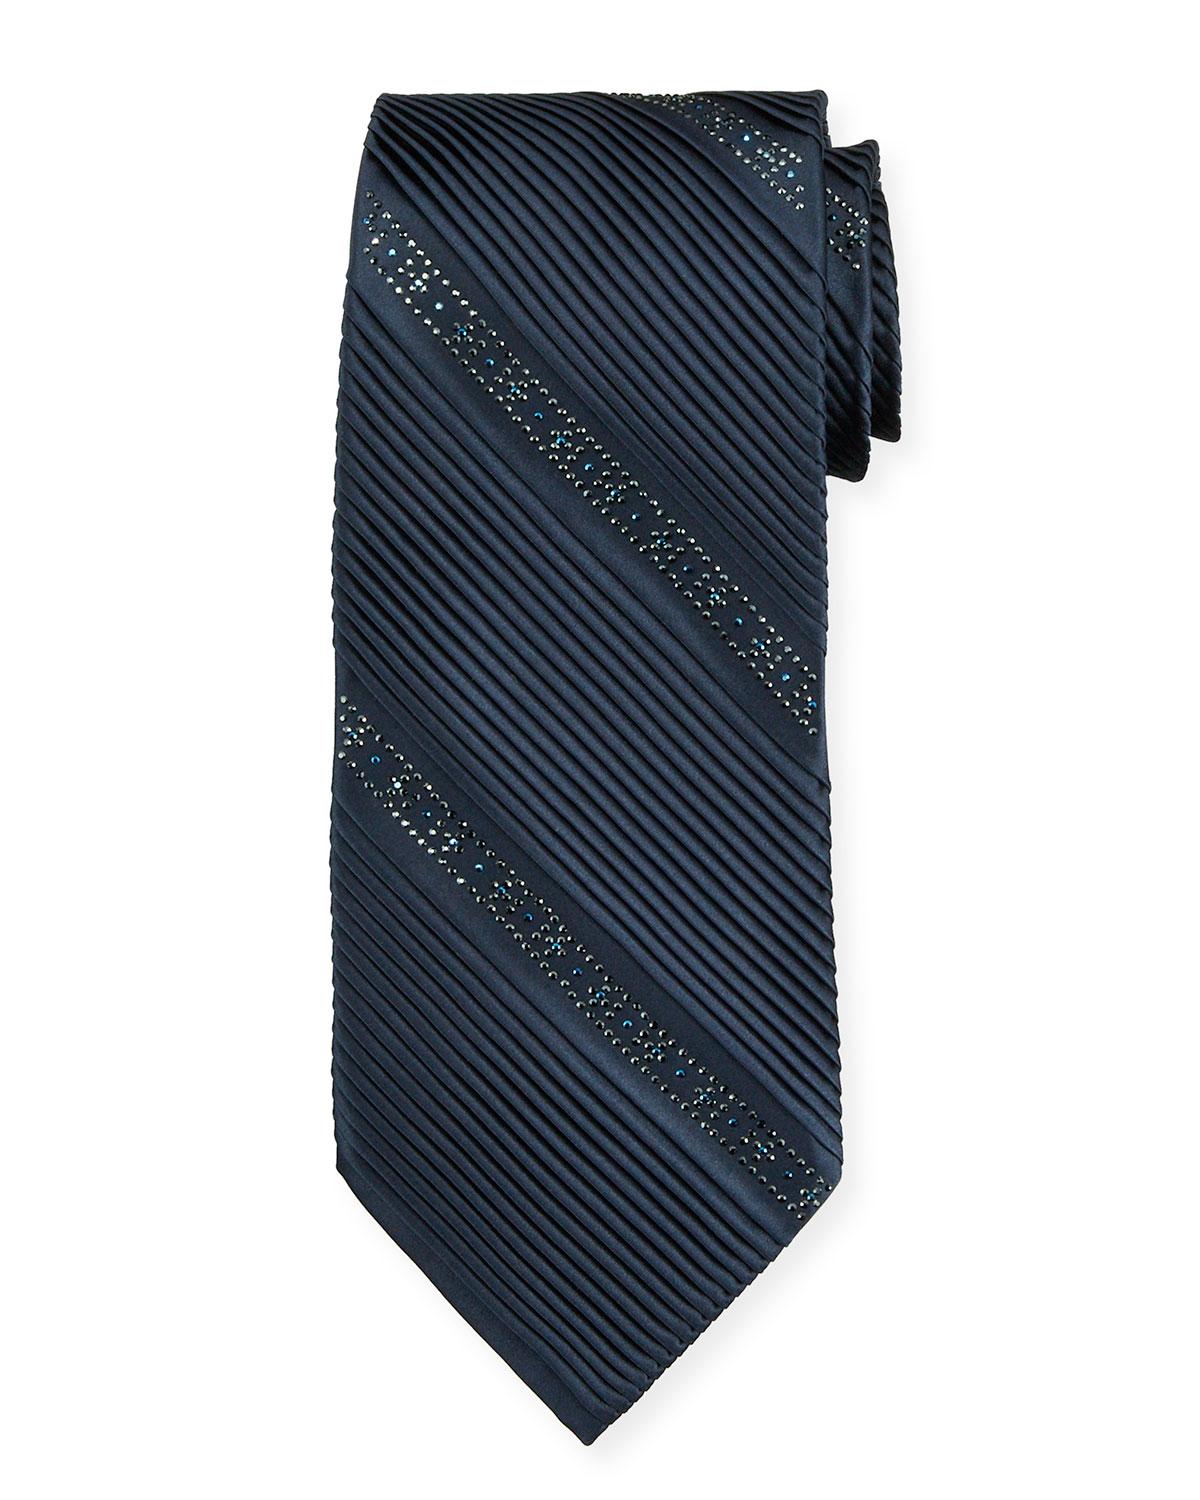 Stefano Ricci Crystal Pleated Silk Tie in Navy (Blue) for Men - Lyst